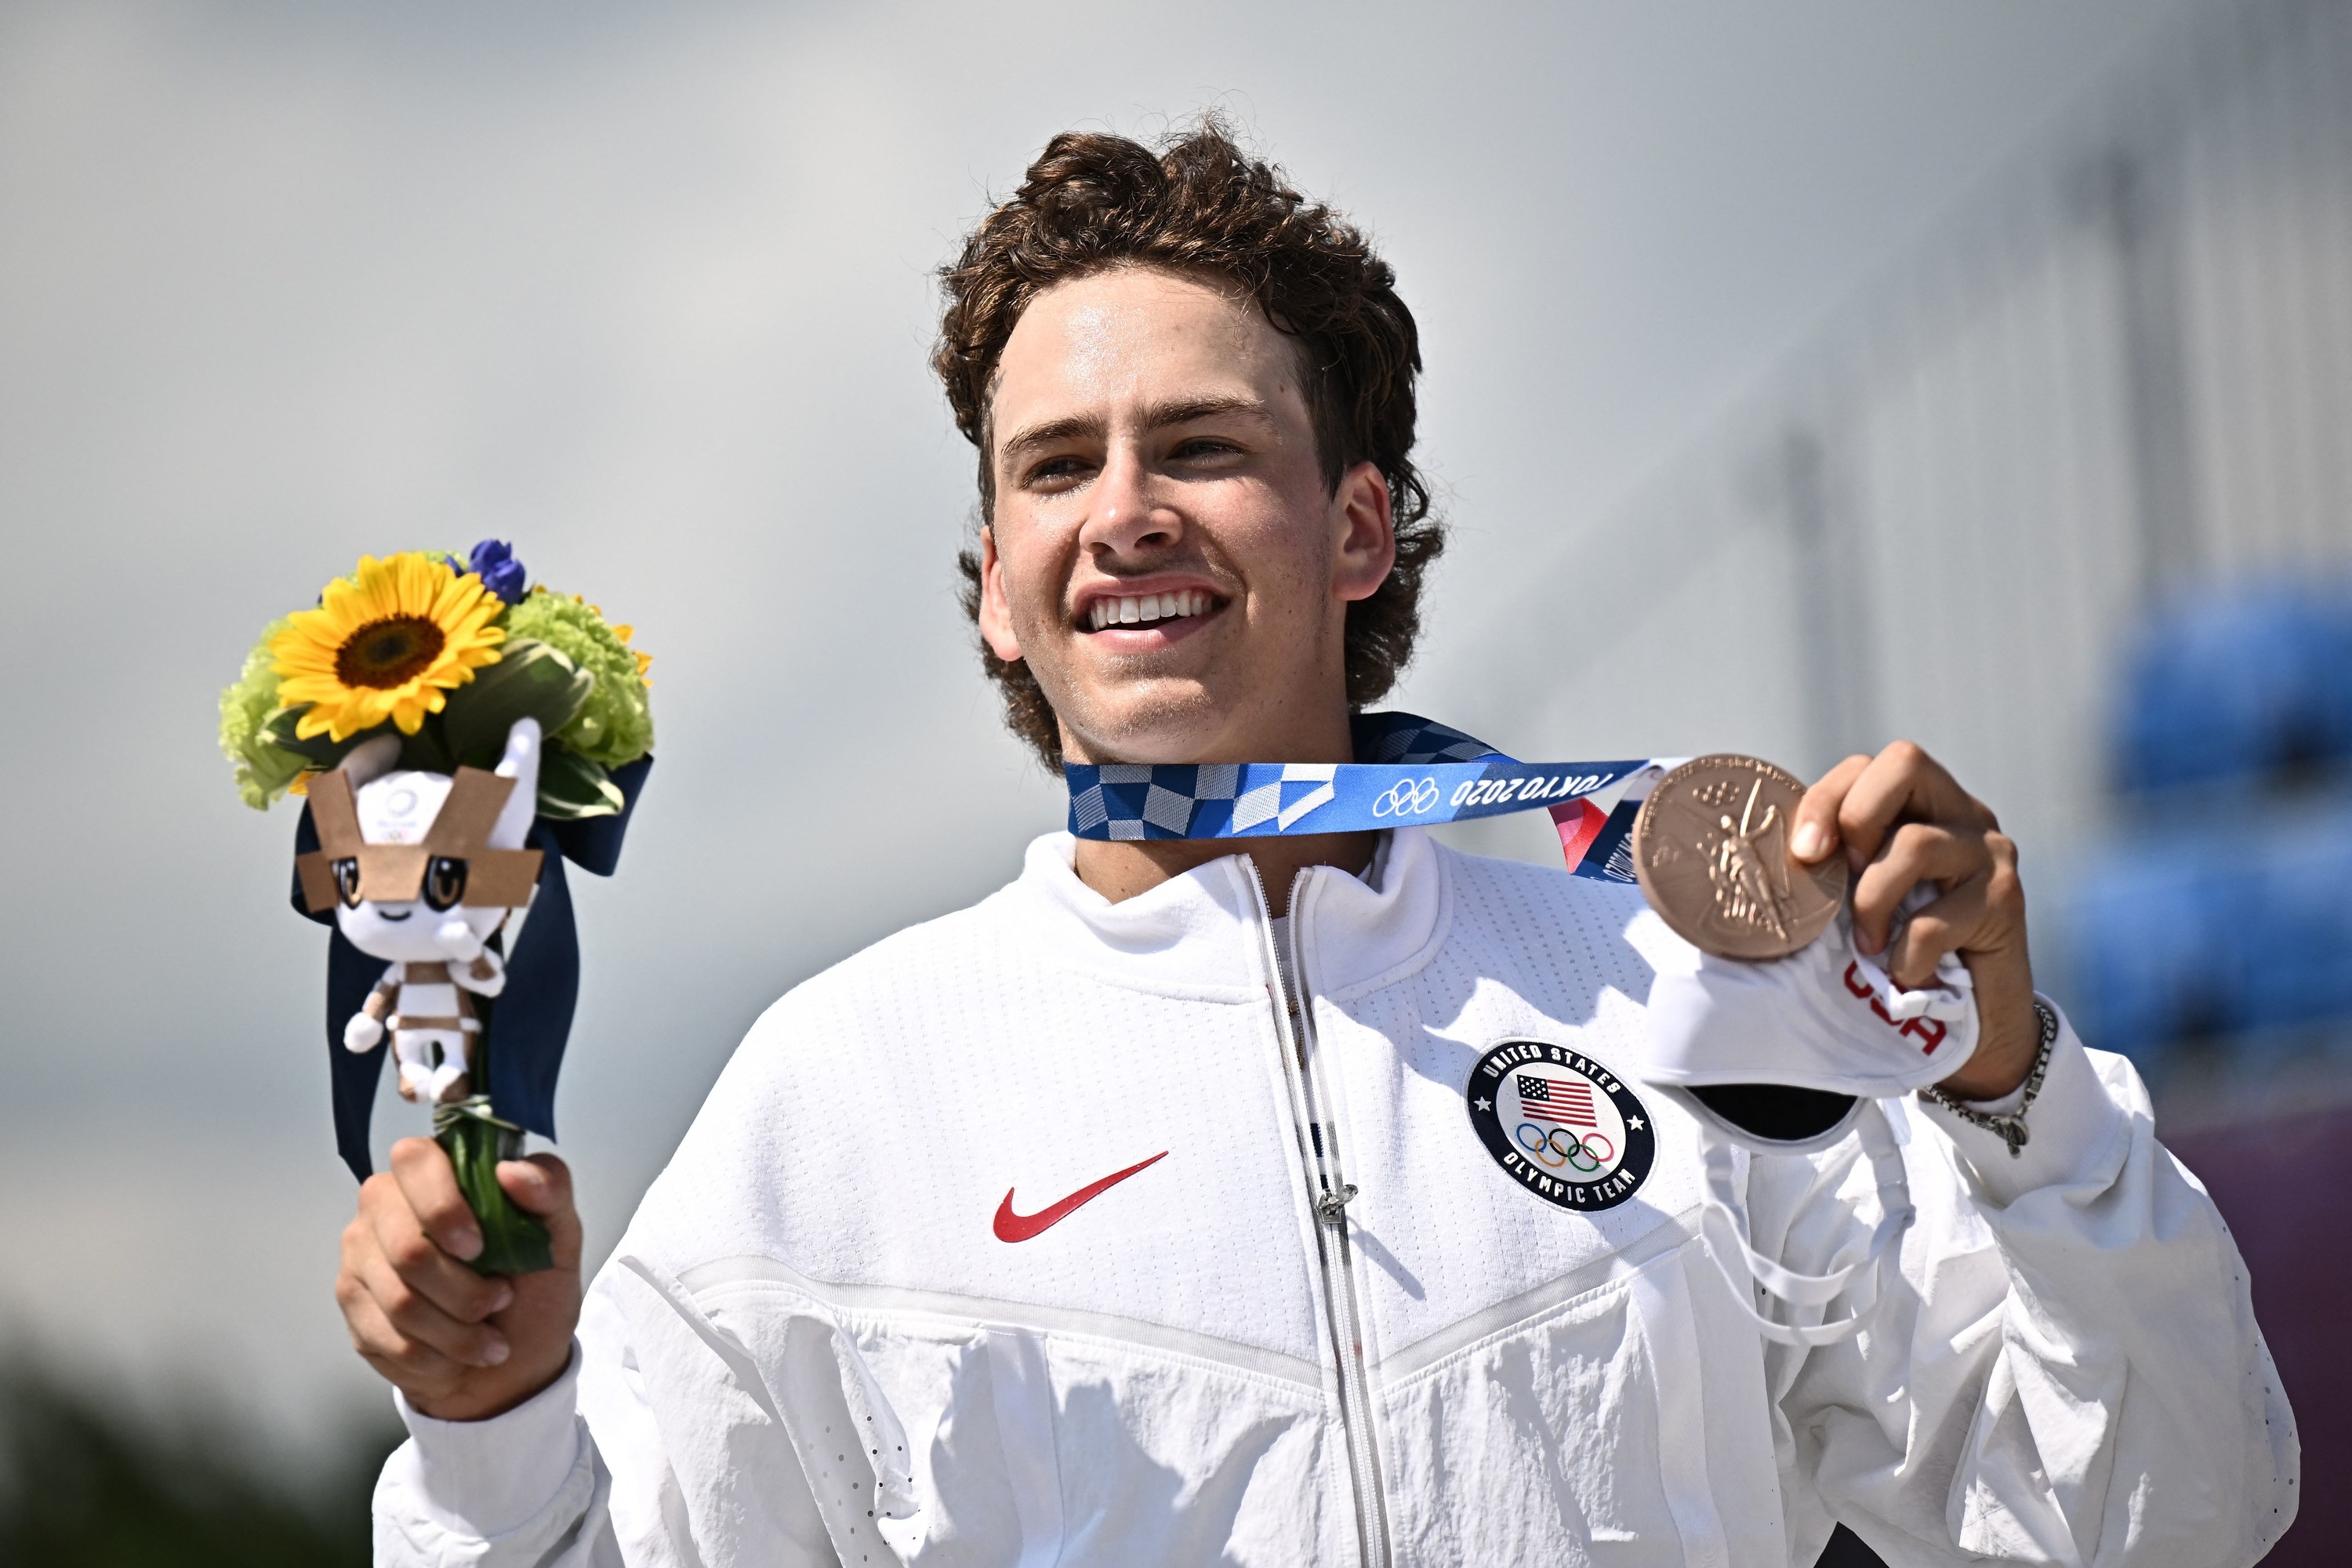 Eaton posing on the podium with his medal and flowers after the men&#x27;s street prelims